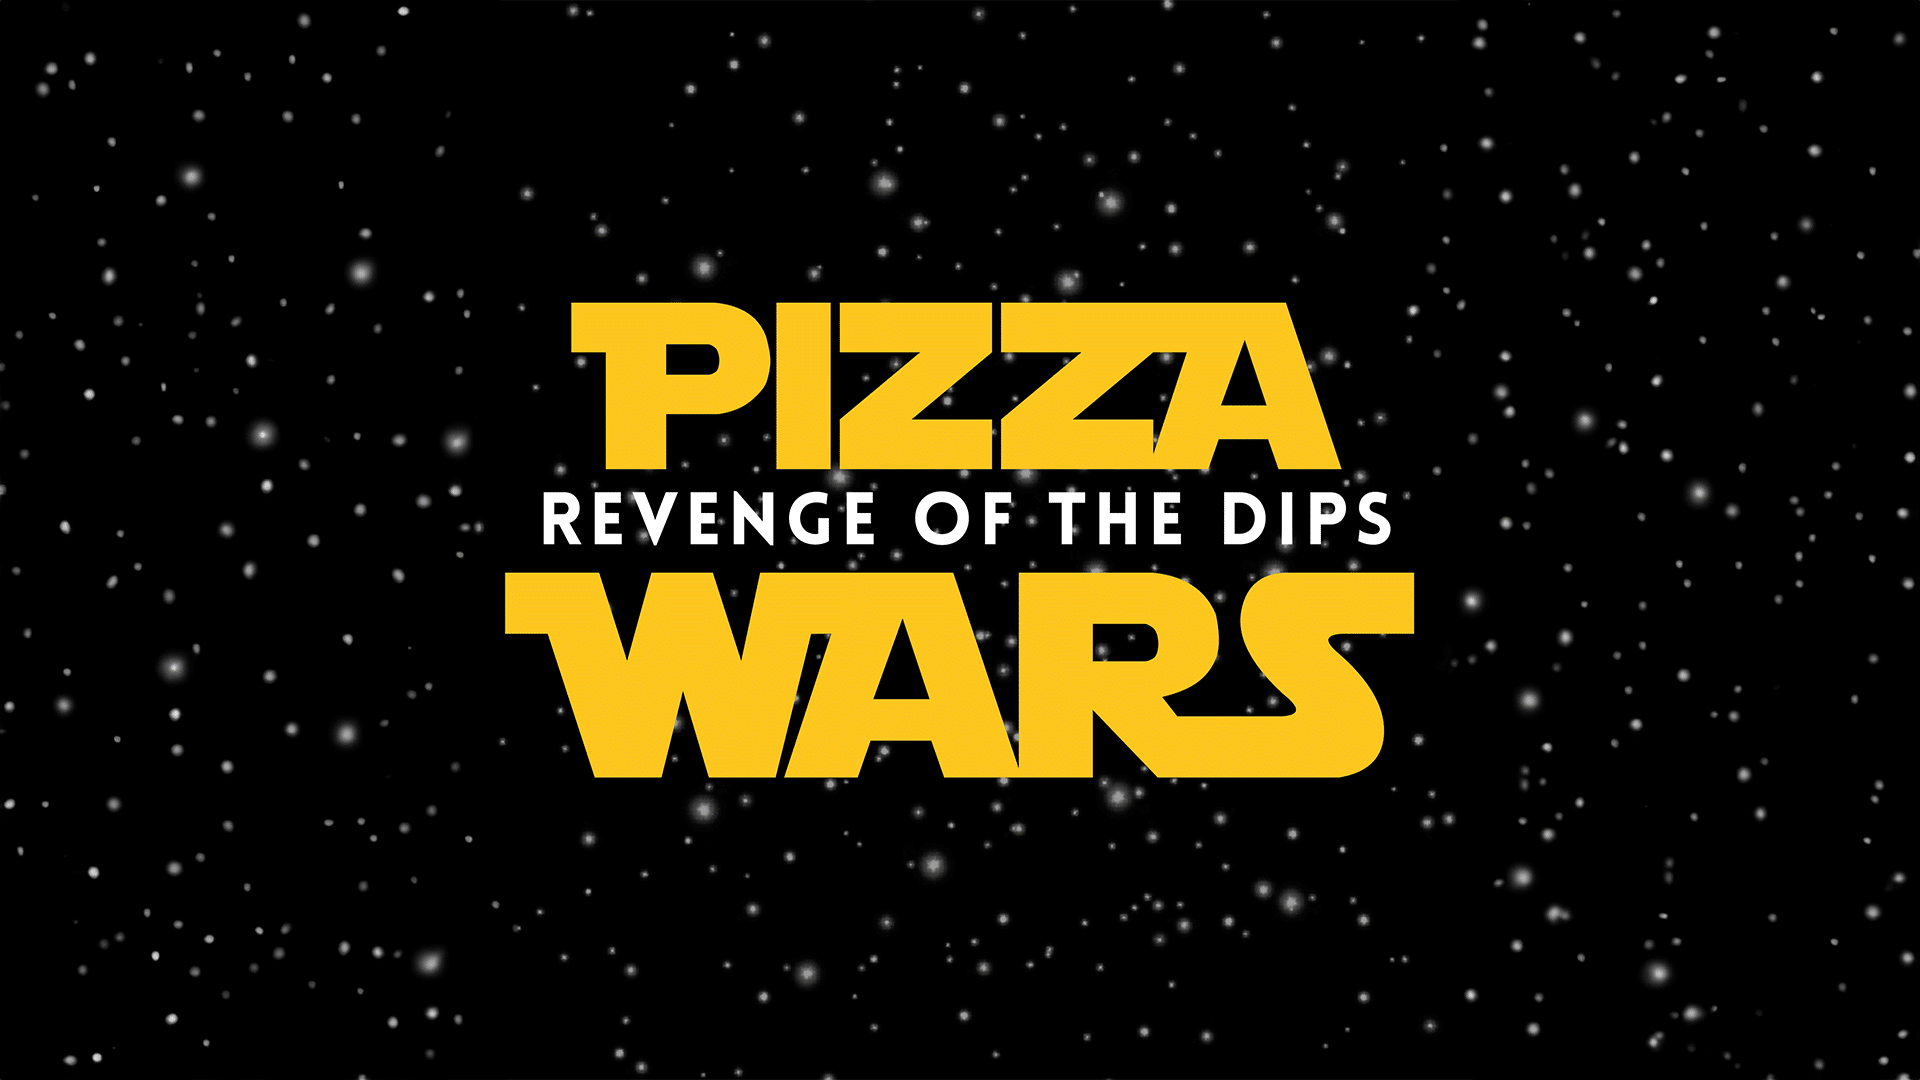 Black background with distant white stars. Block yellow text reads 'PIZZA WARS'. in between the two words, smaller white text reads 'Revenge of the Dips'.